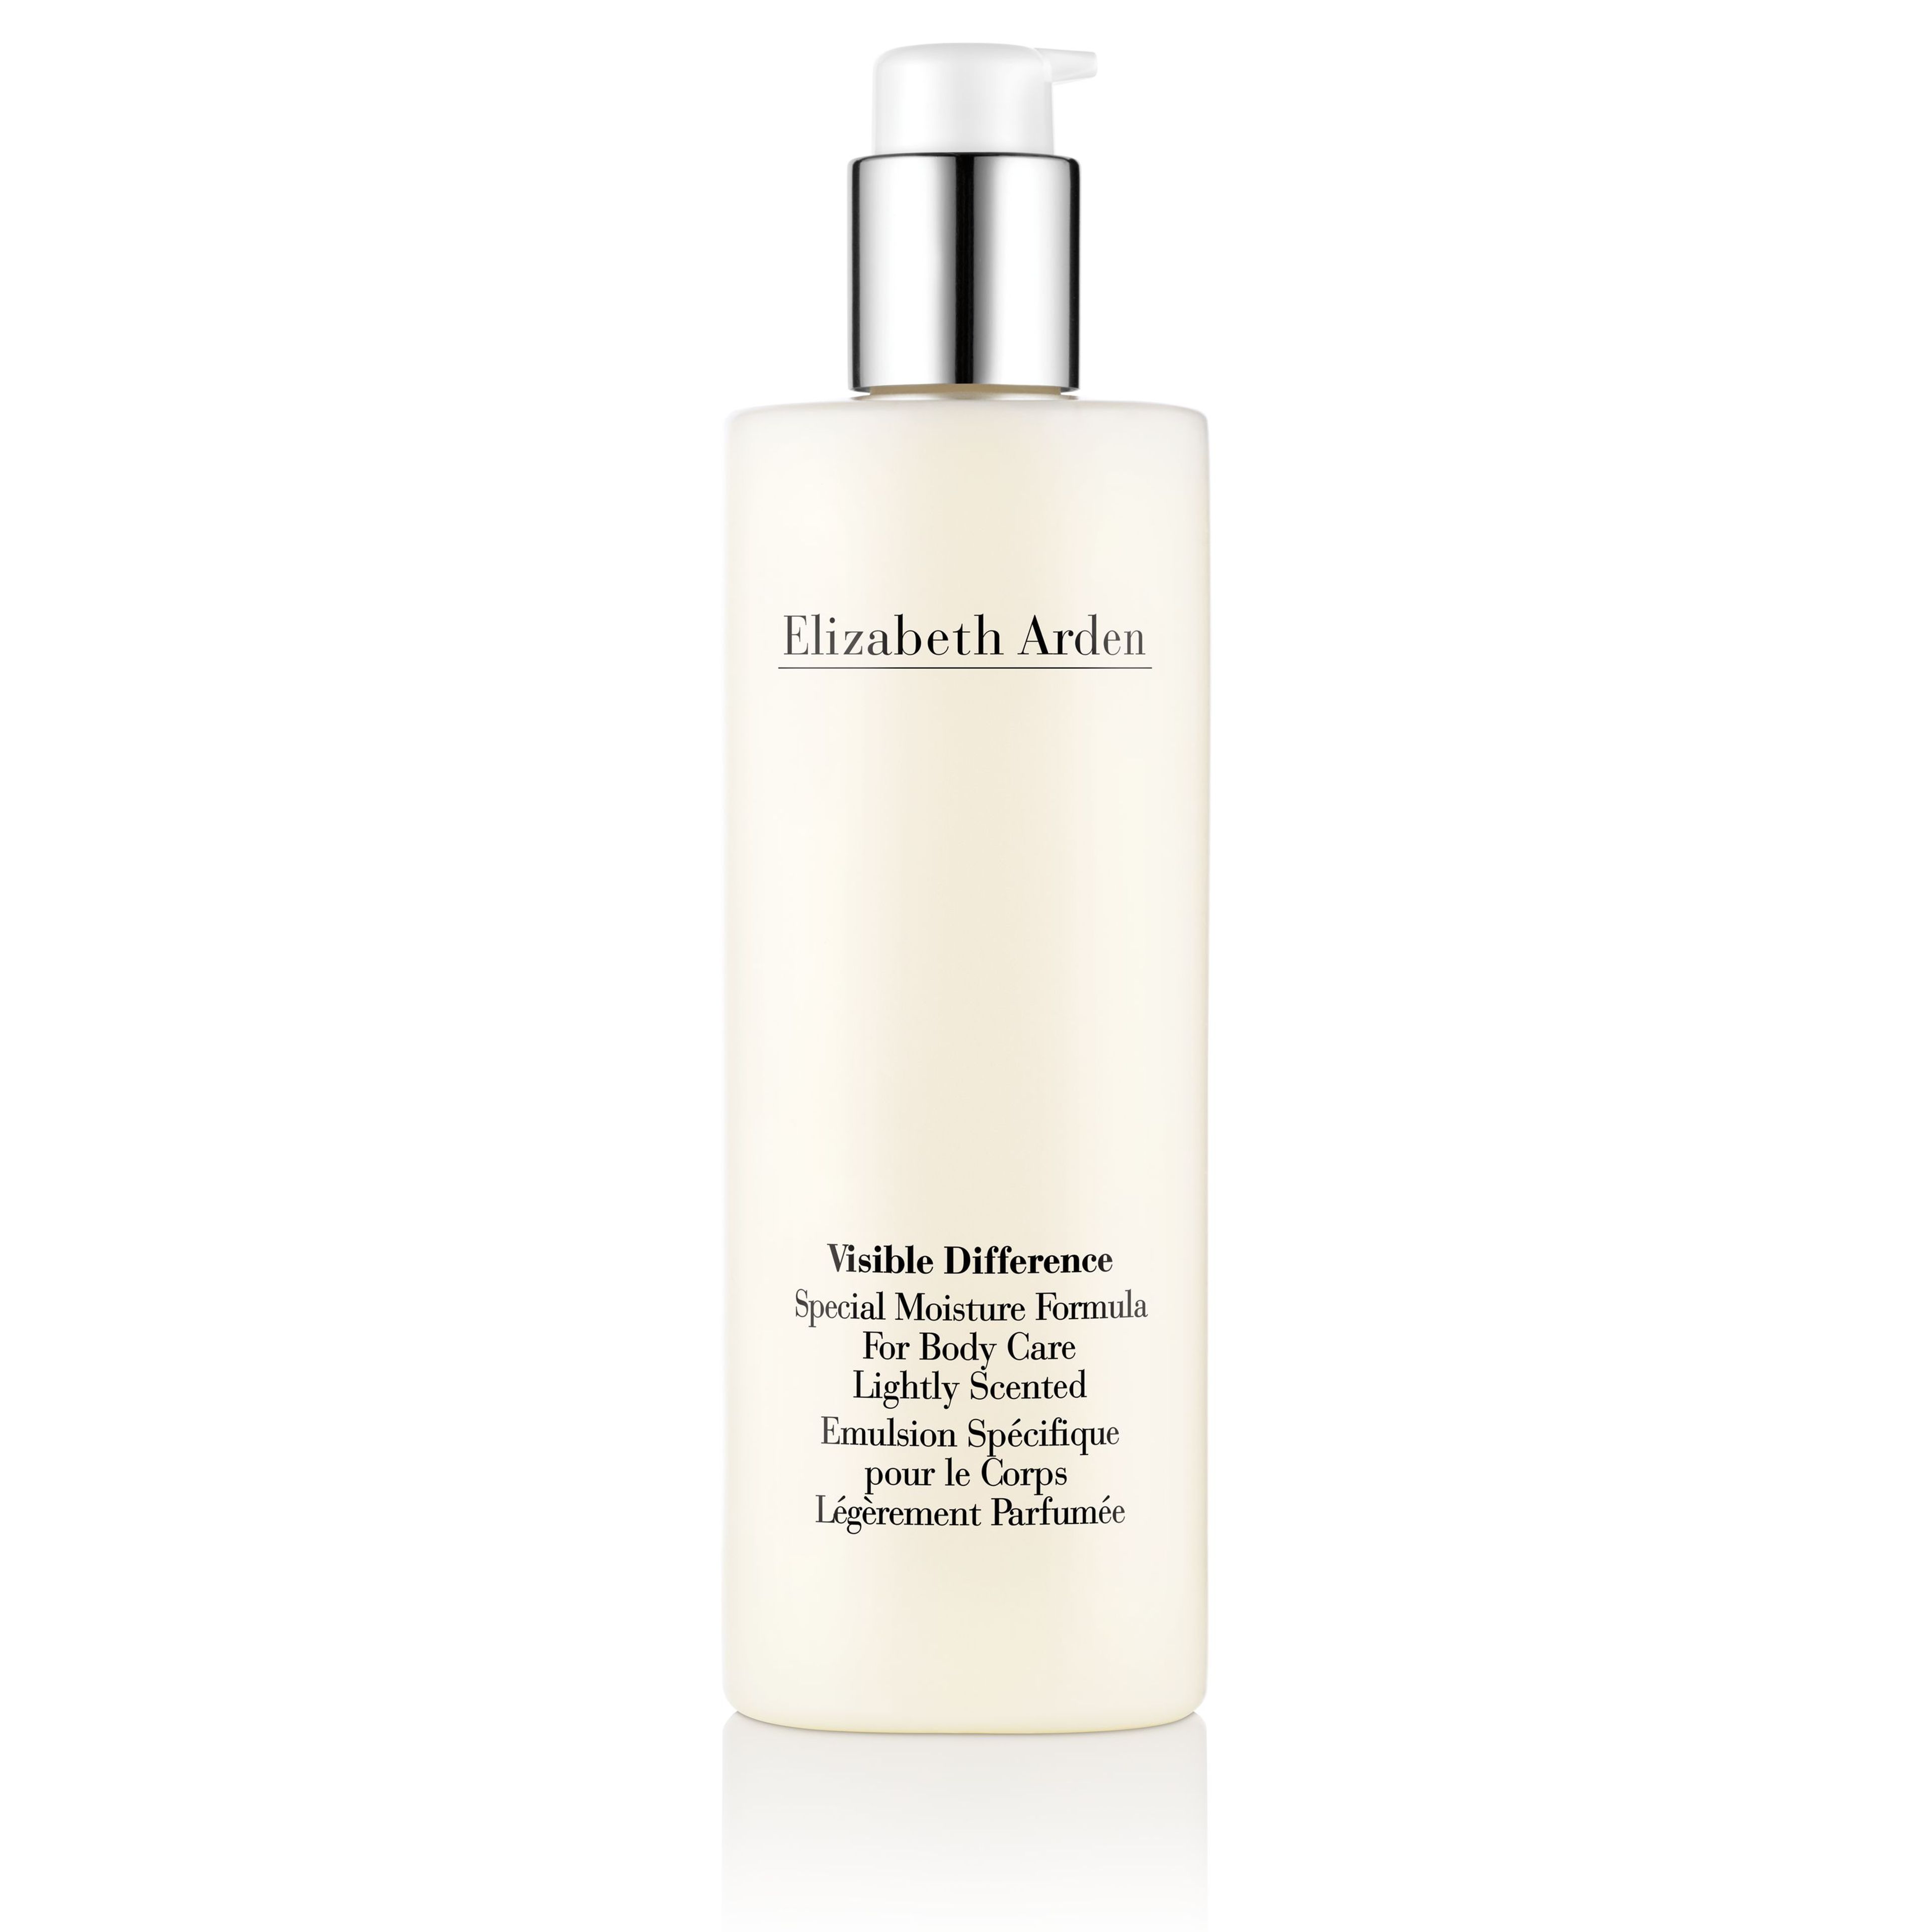 Elizabeth Arden Visible Difference Special Moisture Formula For Body Care 1